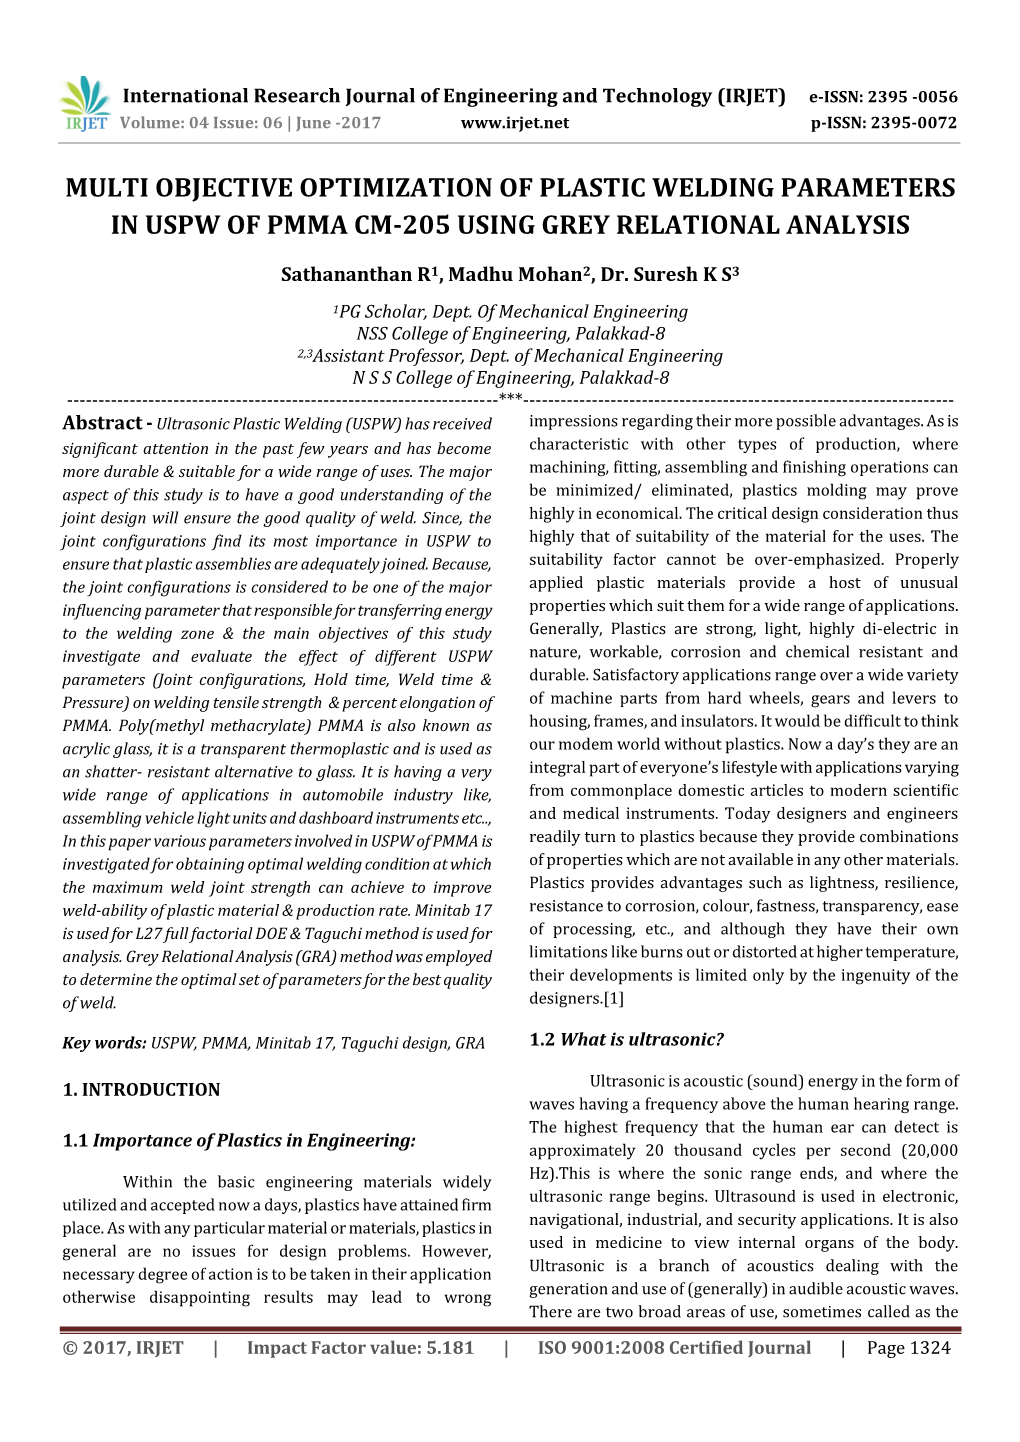 Multi Objective Optimization of Plastic Welding Parameters in Uspw of Pmma Cm-205 Using Grey Relational Analysis